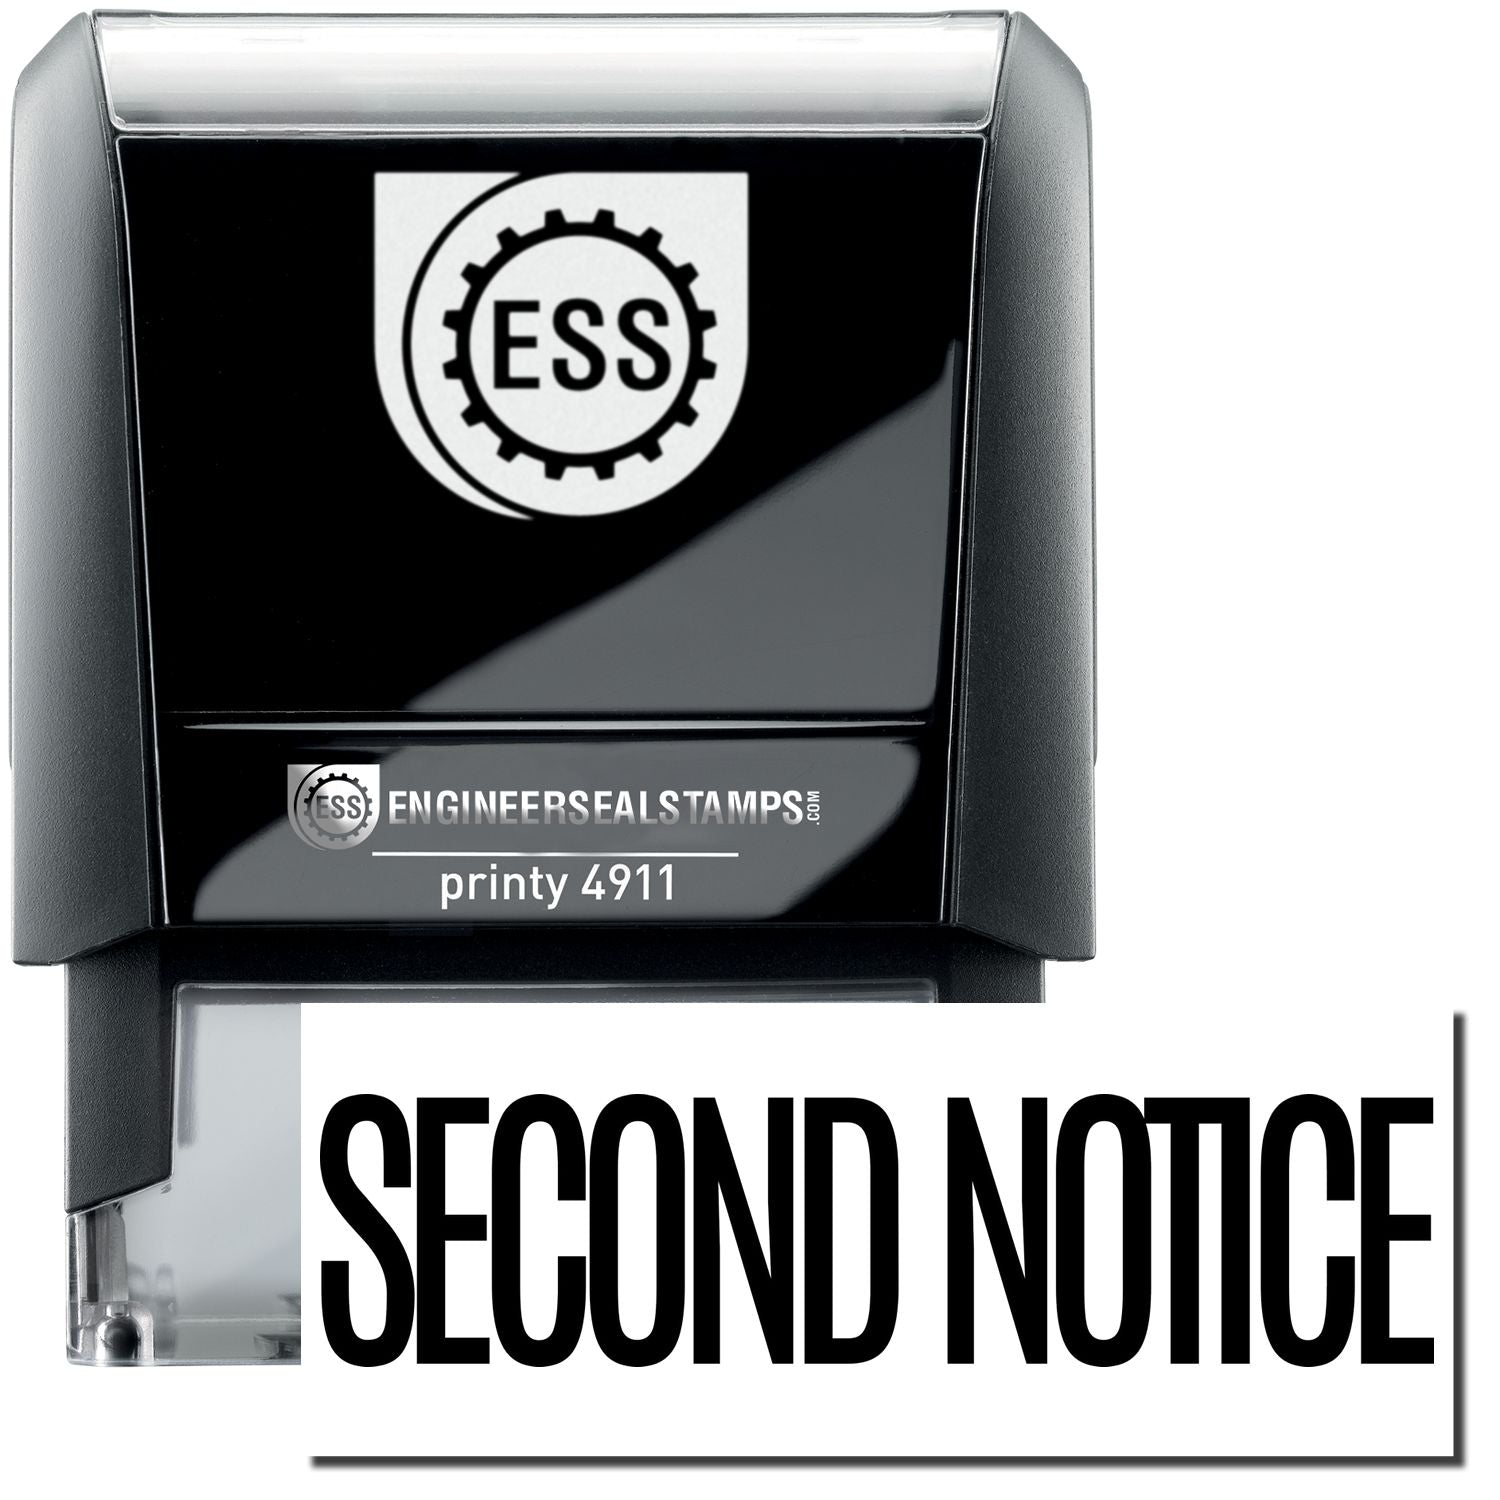 A self-inking stamp with a stamped image showing how the text "SECOND NOTICE" in a narrow font is displayed after stamping.